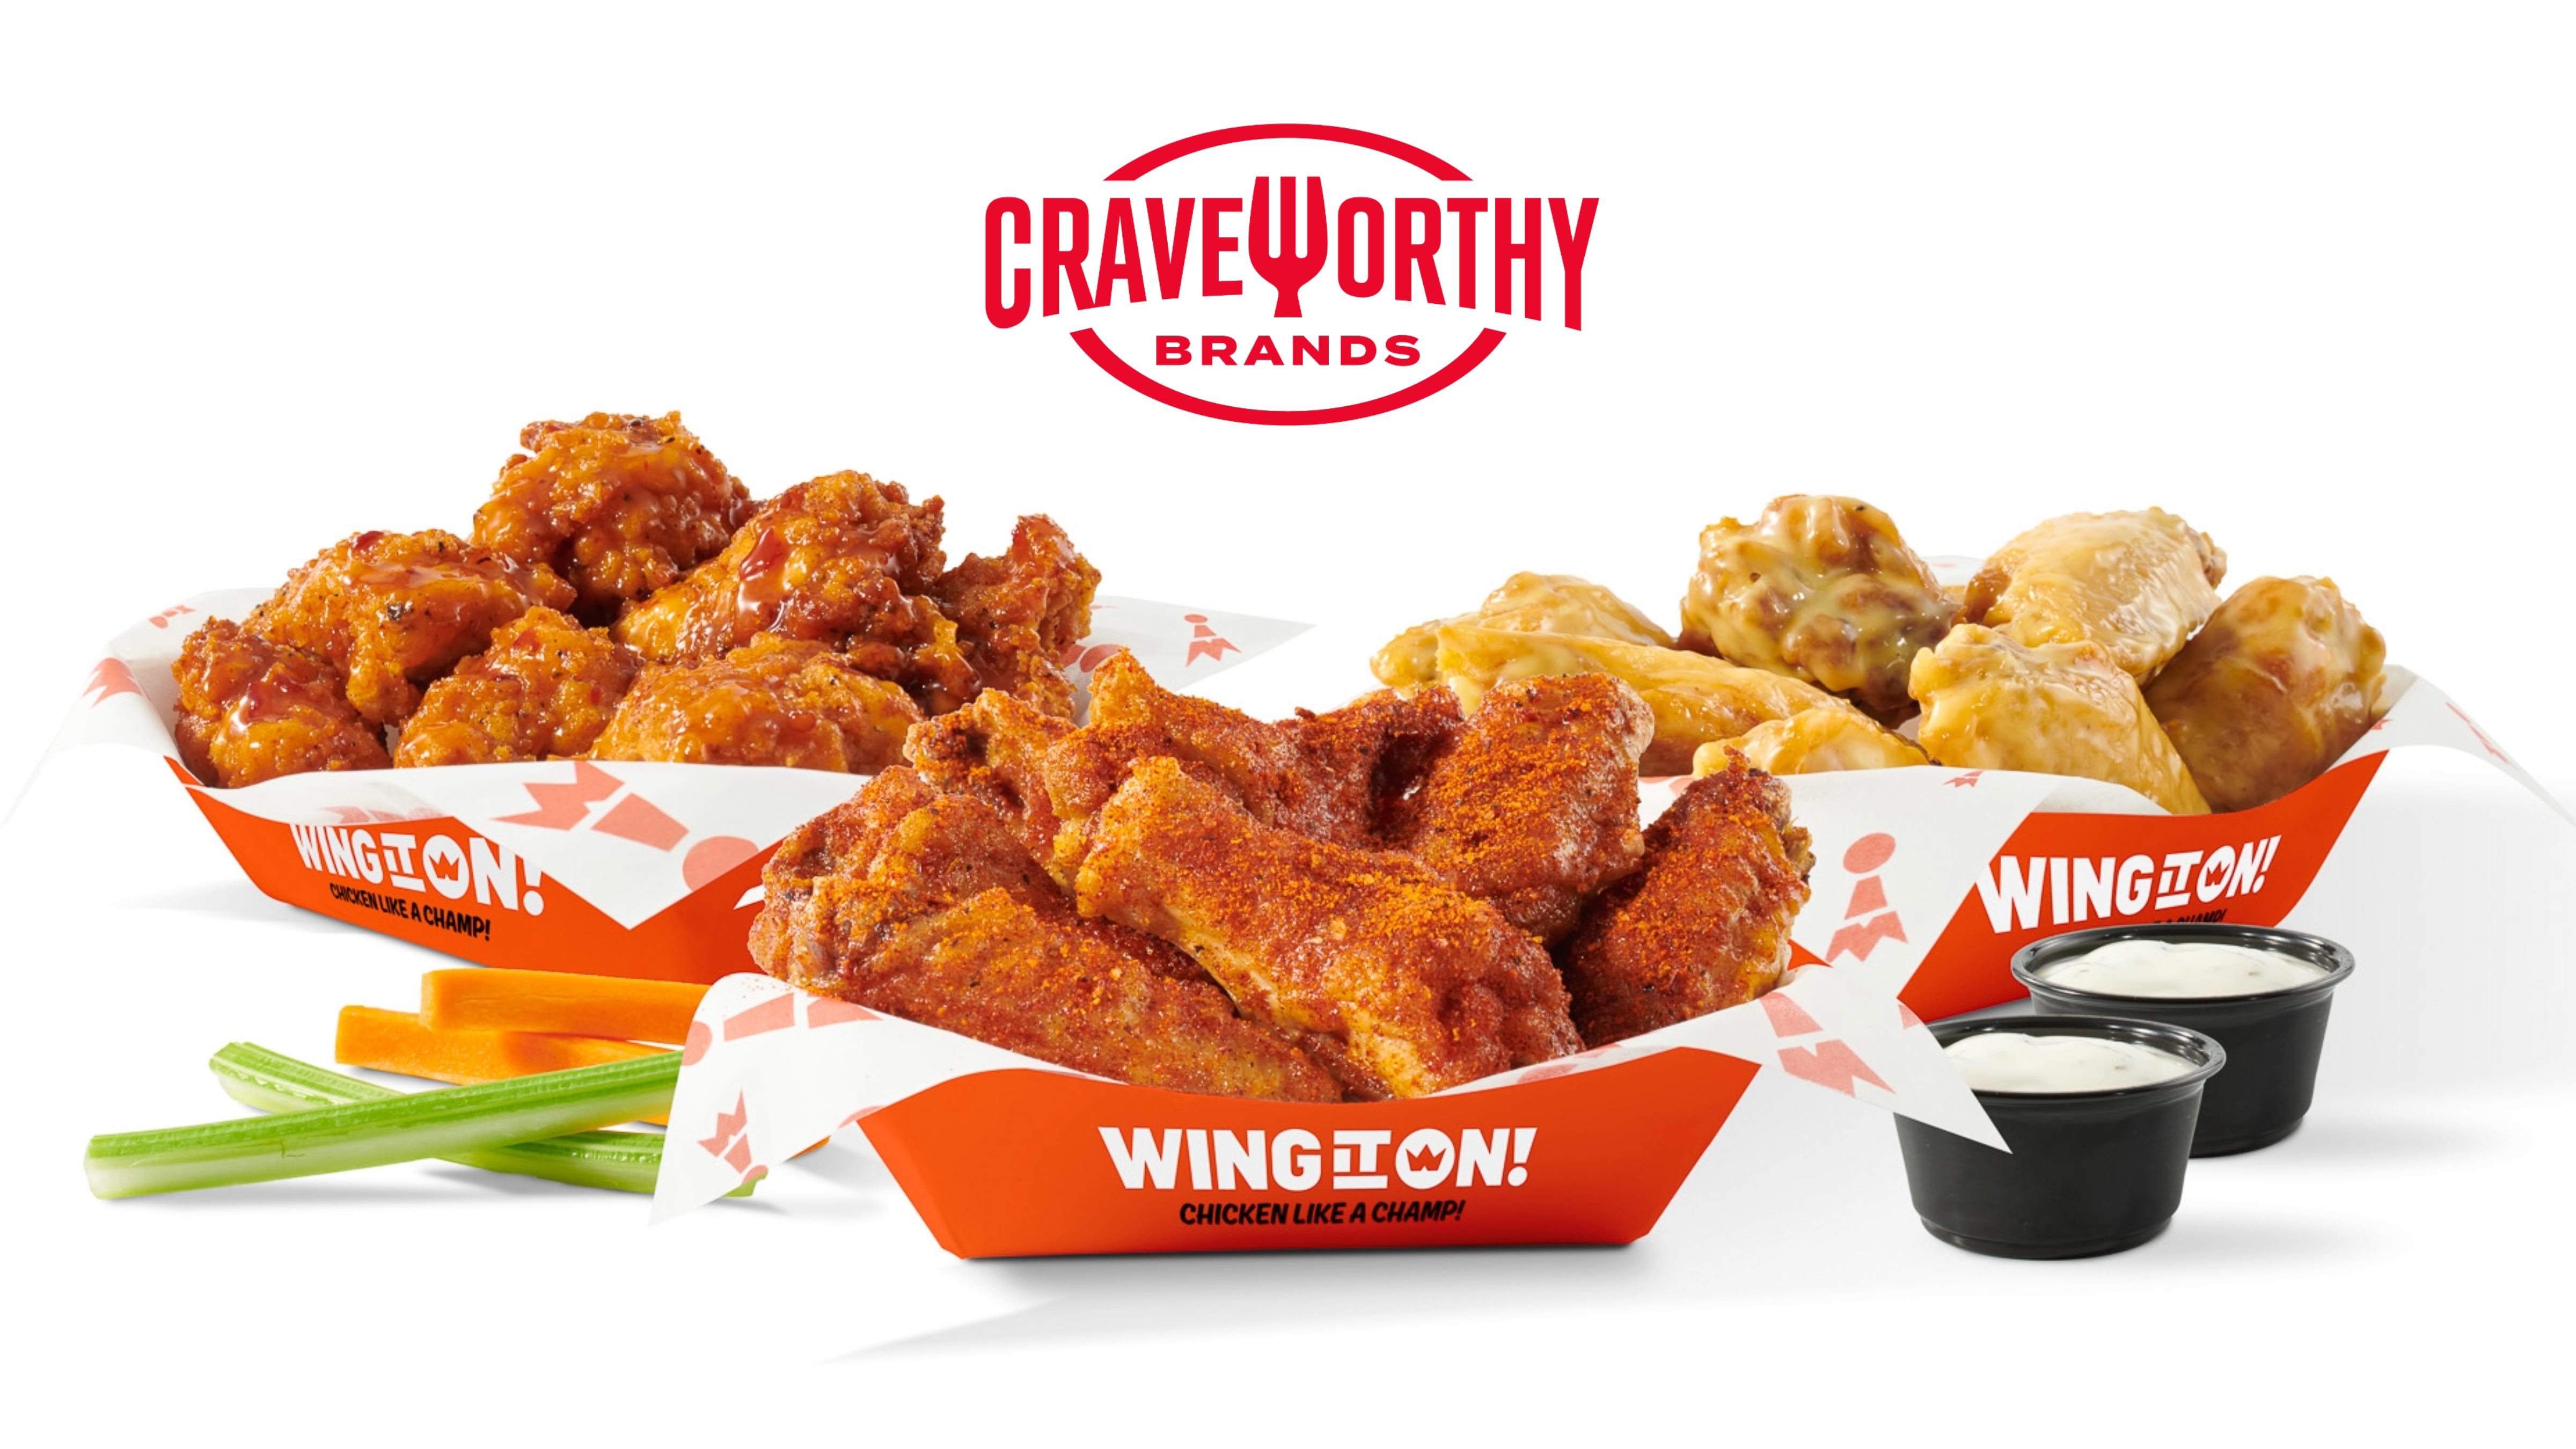 Wing It On!'s 2023 brand relaunch under Craveworthy Brands